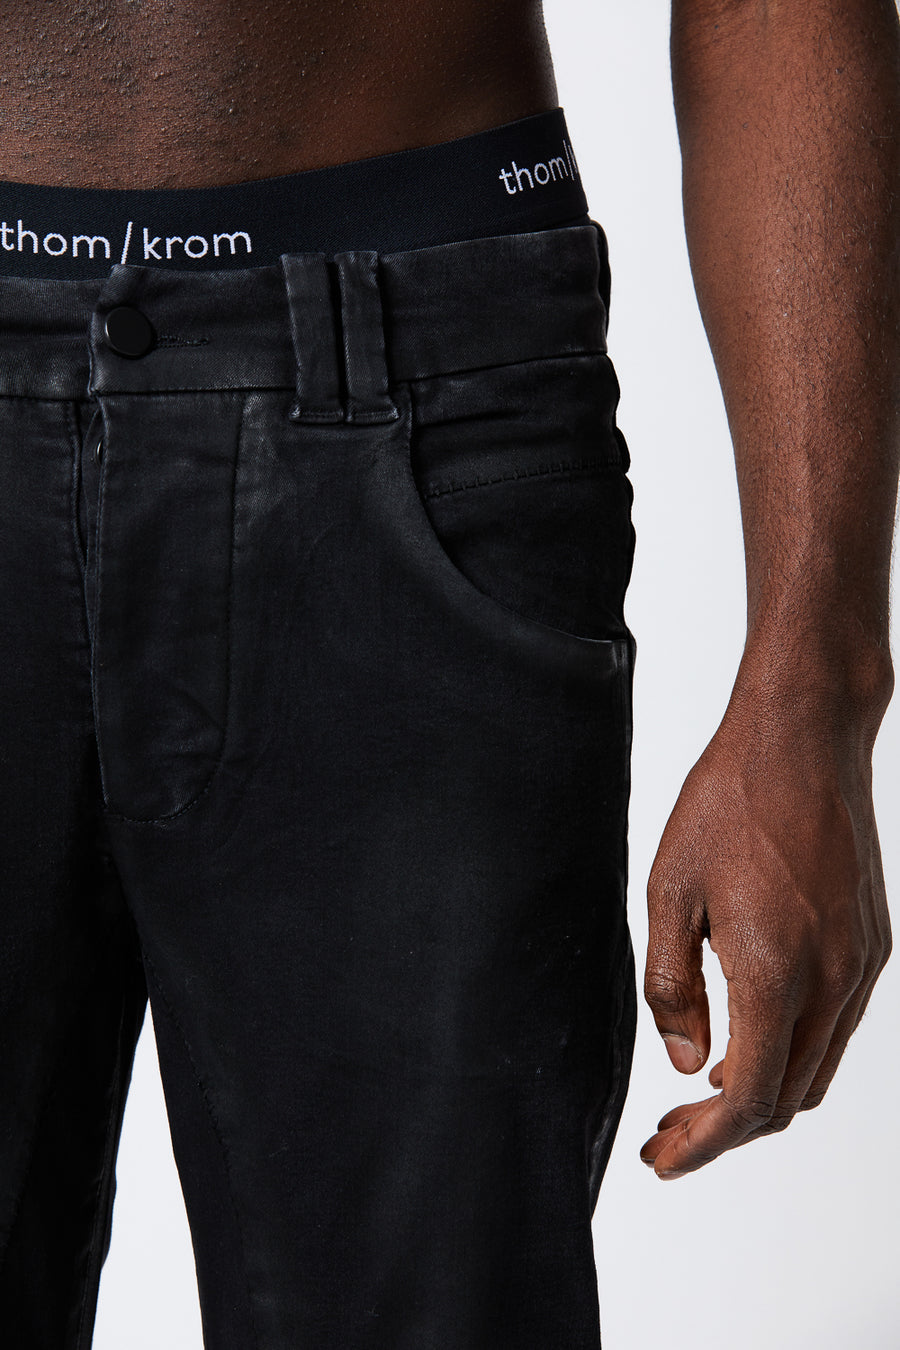 Buy the Thom Krom M T 75 Jeans Black Coated at Intro. Spend £50 for free UK delivery. Official stockists. We ship worldwide.